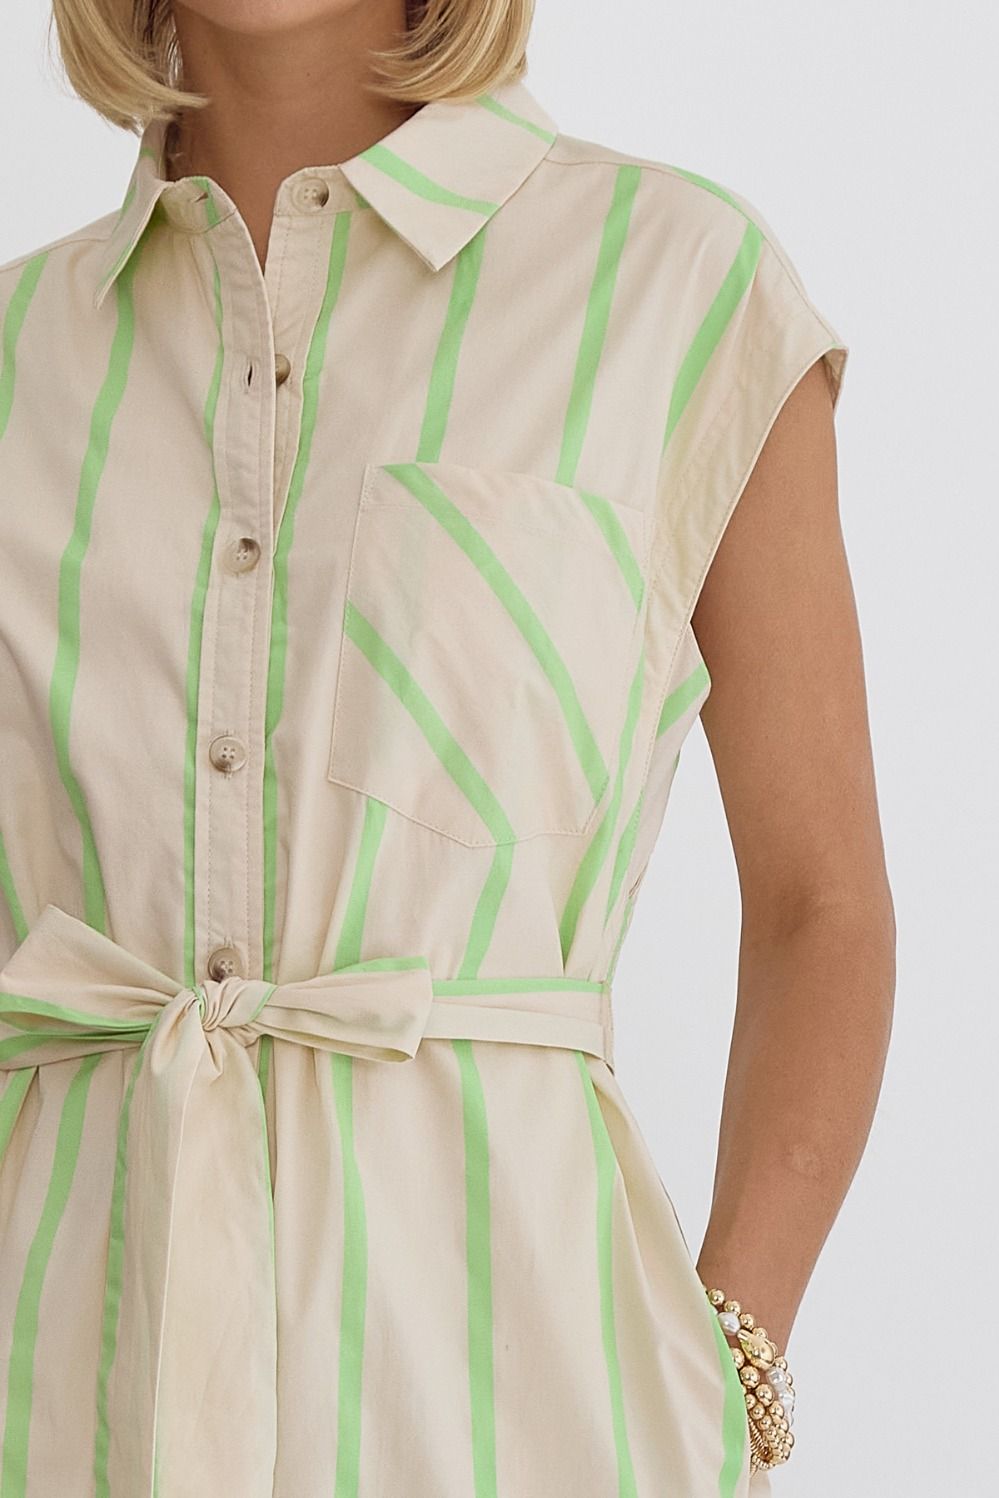 striped sleevless button up midi dress in lime-front detail